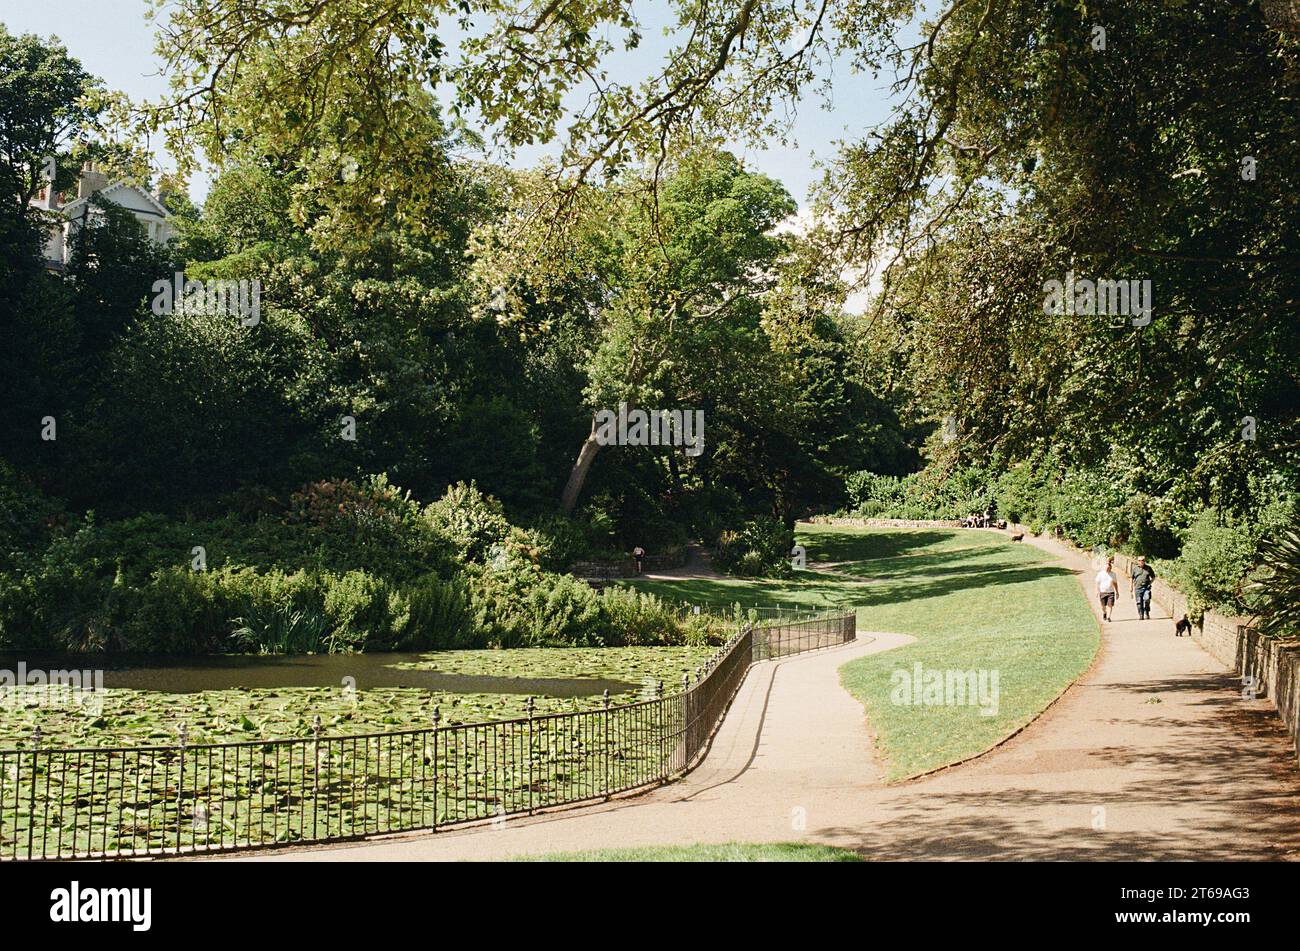 St Leonards Gardens, St Leonards-on-Sea, East Sussex, England, in early summer Stock Photo